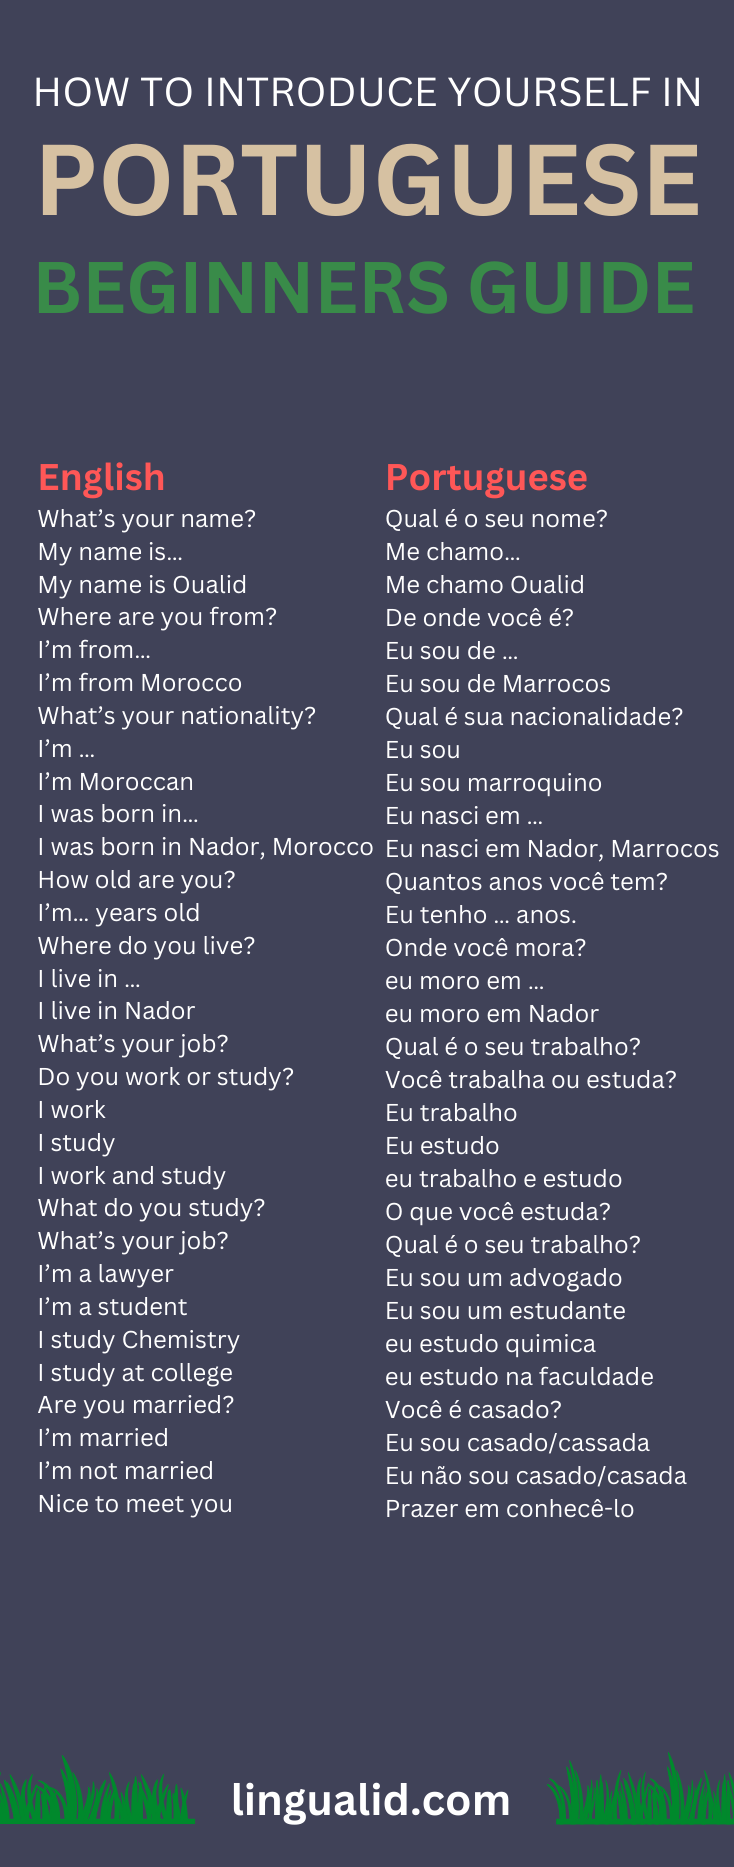 How To Introduce Yourself In Portuguese visual